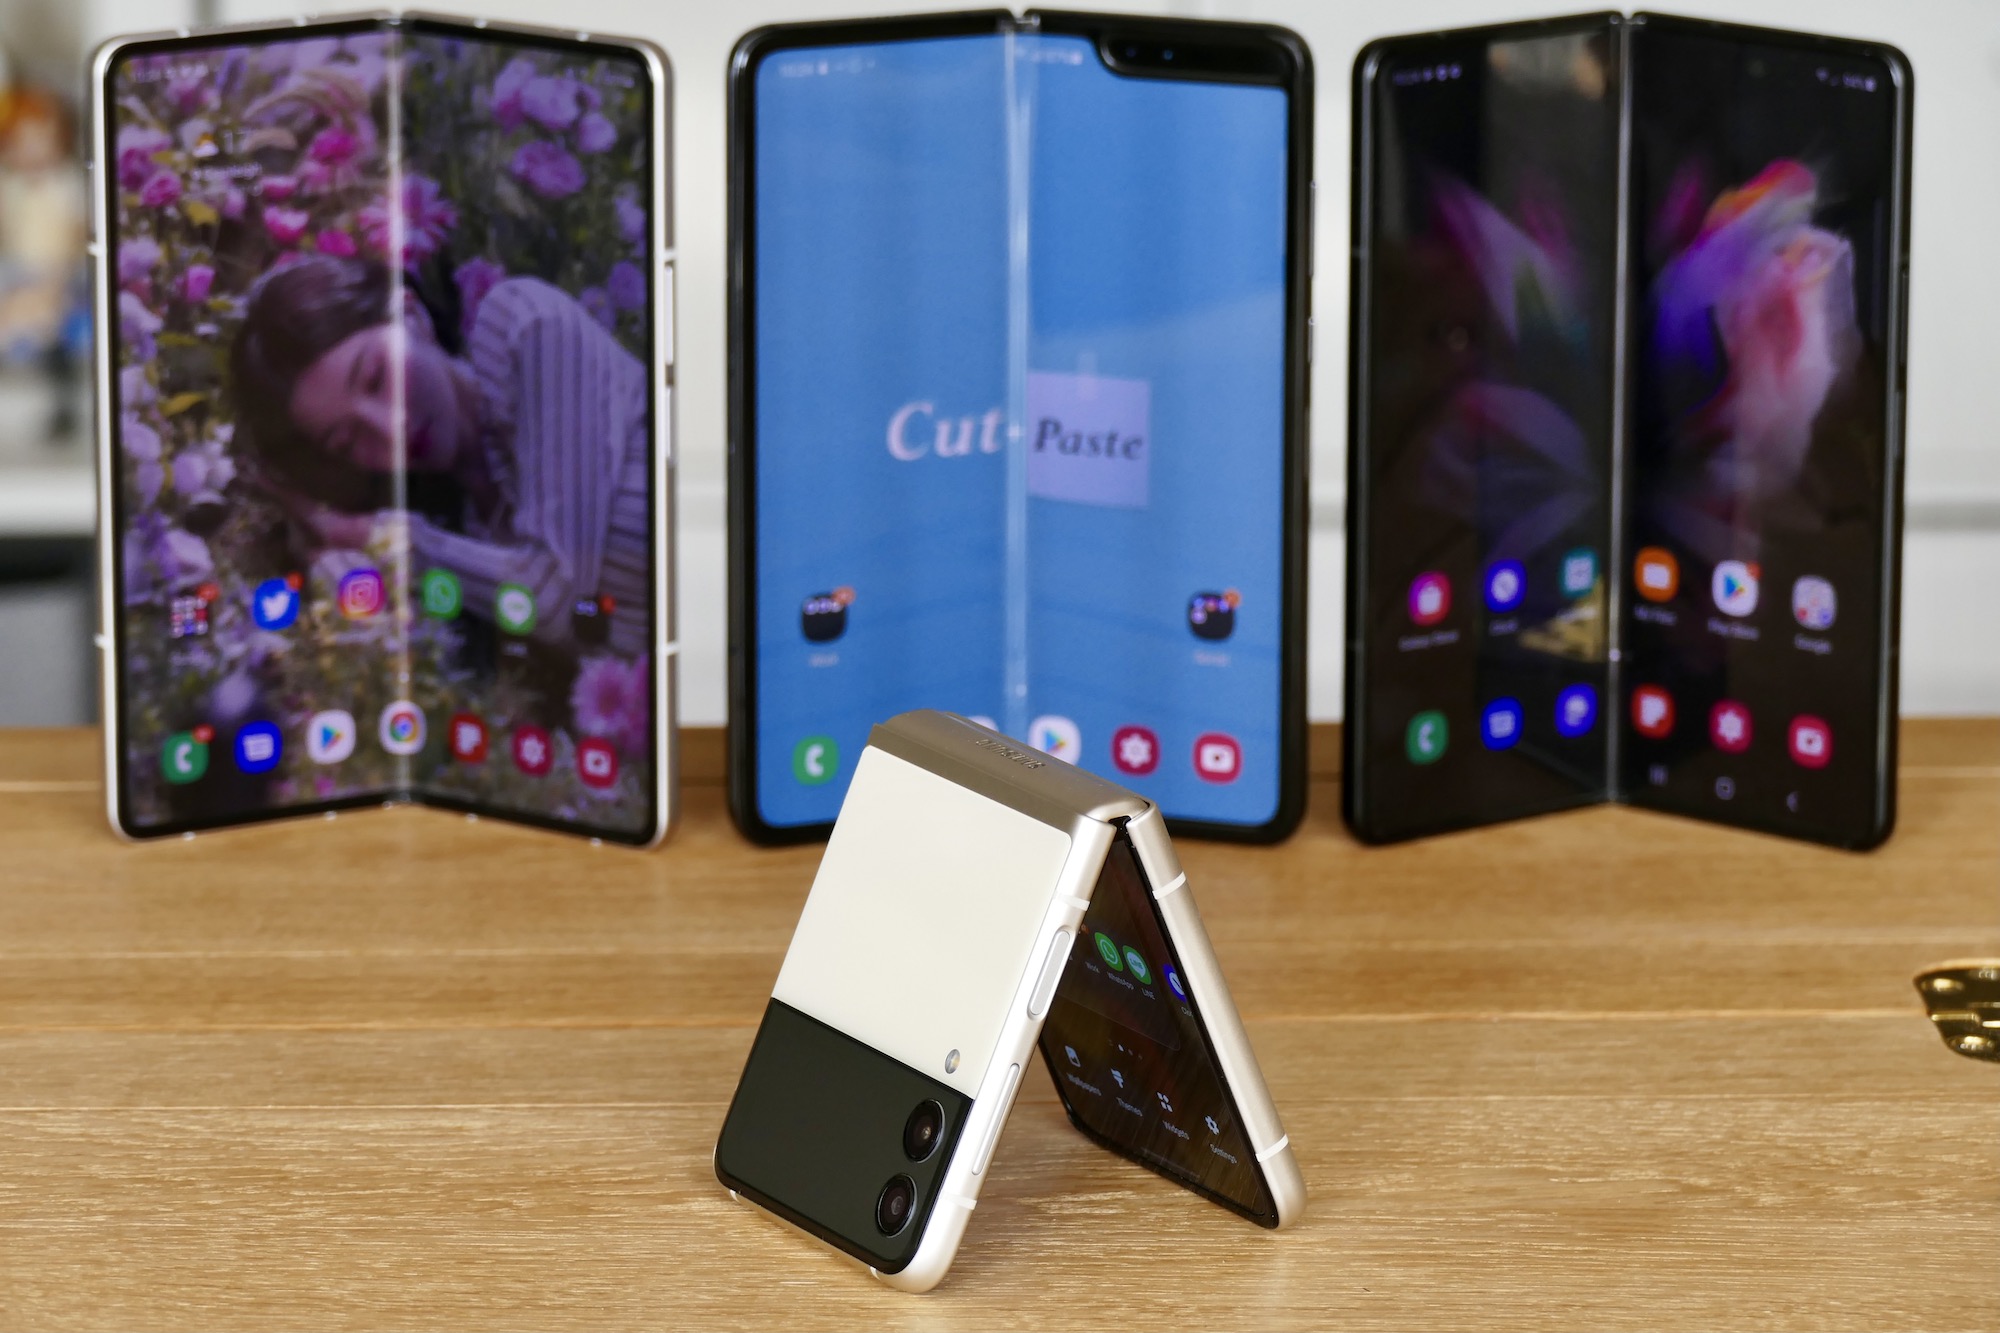 Samsung Galaxy Z Flip 3: Cool Foldable Phone Review